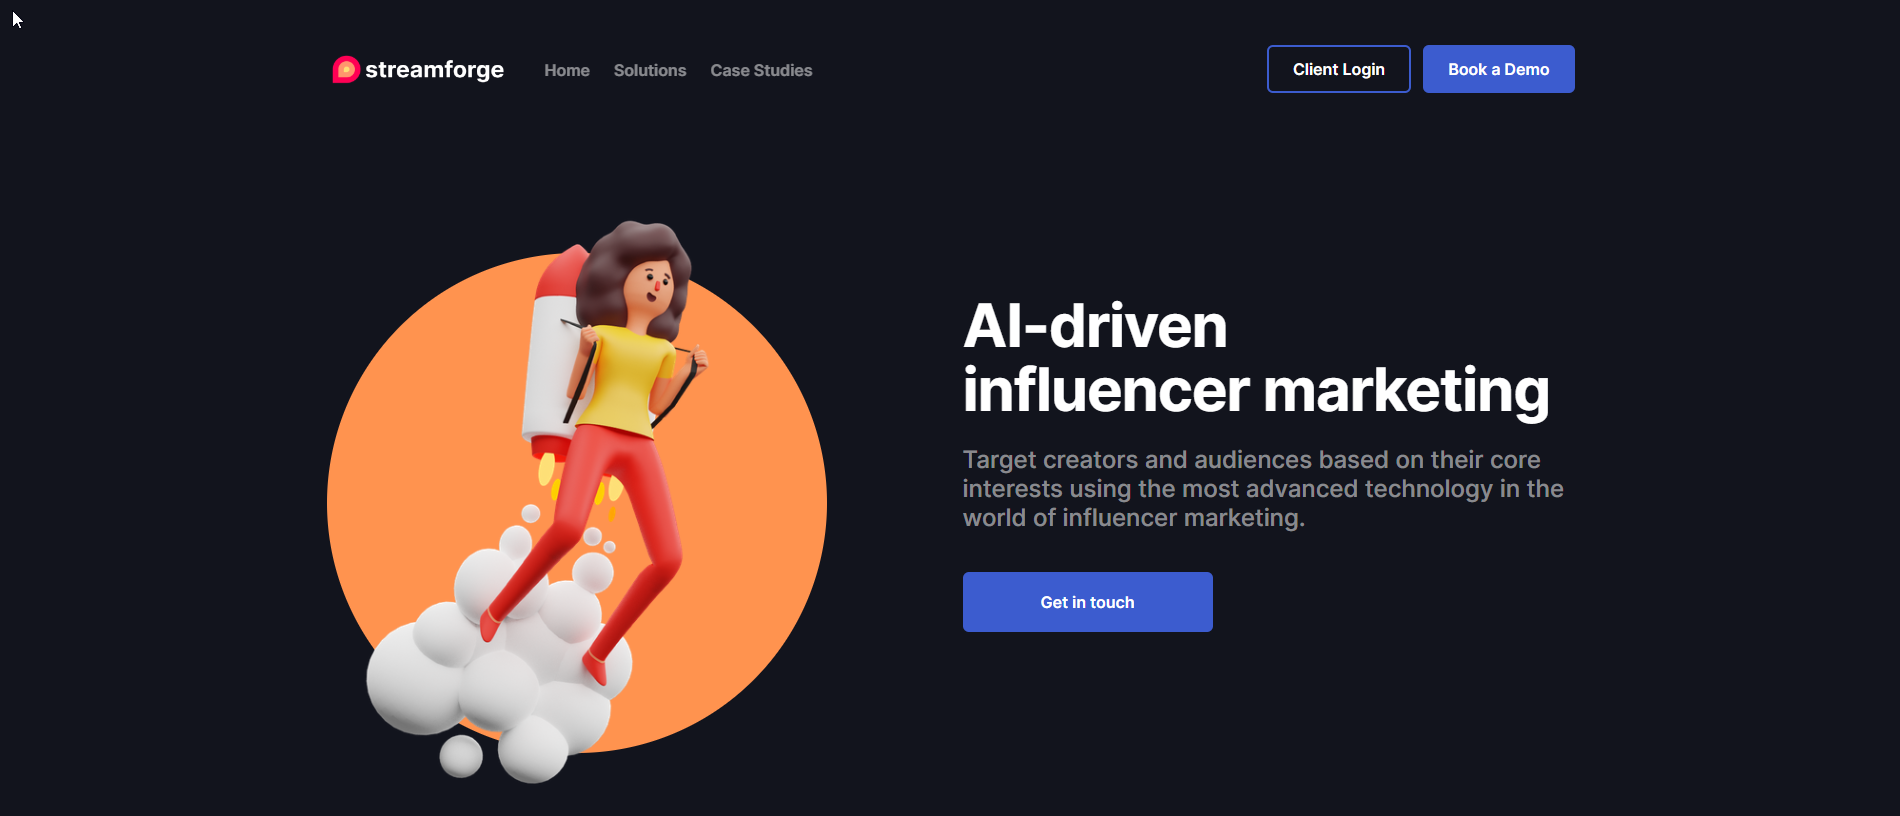 Streamforge successfully secures $1.2 million in seed funding for its AI-powered gaming influencer marketing venture.